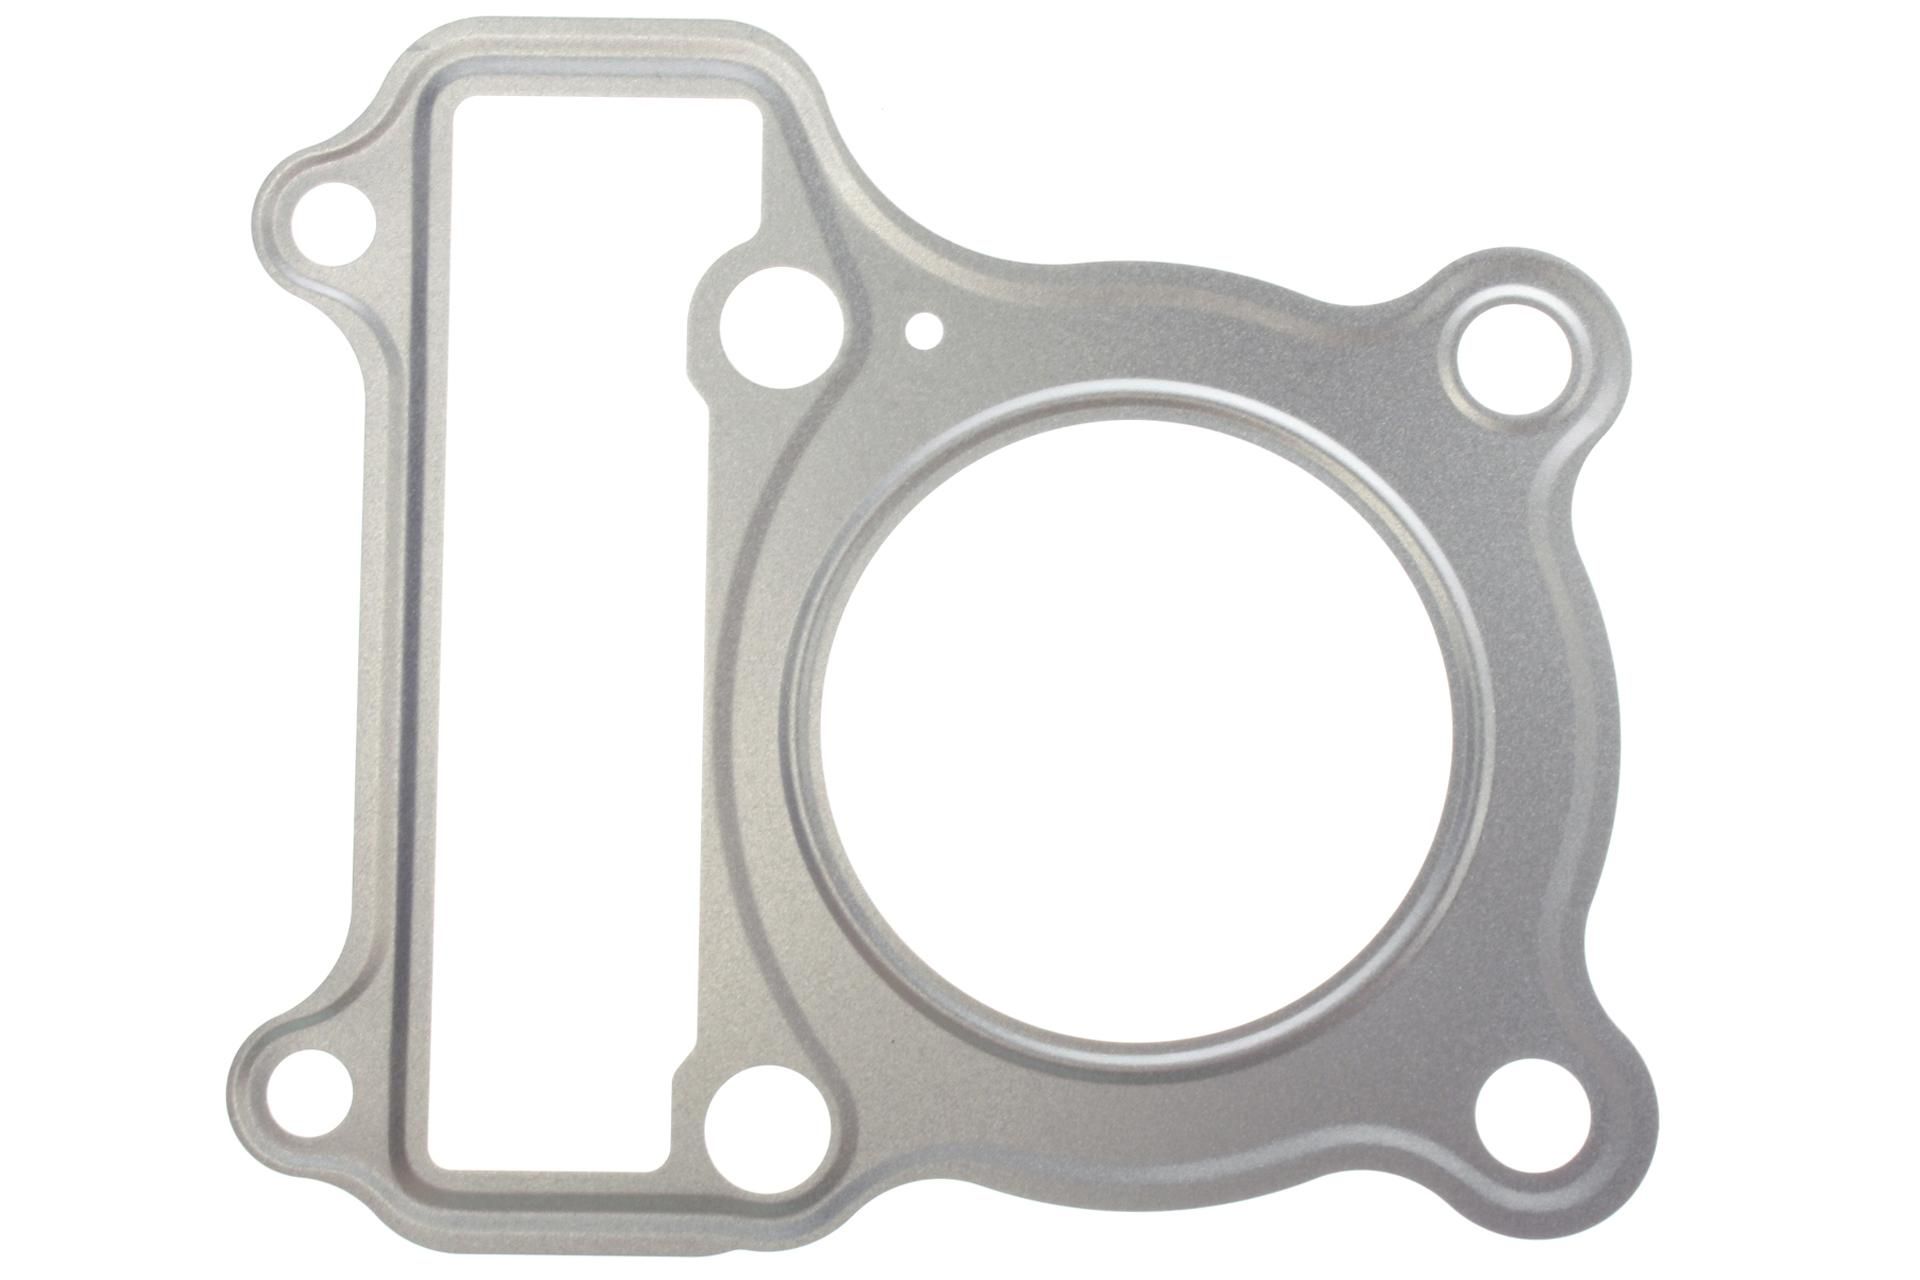 3S0-E1181-00-00 Superseded by 5TN-E1181-00-00 - GASKET, CYLINDER HEA